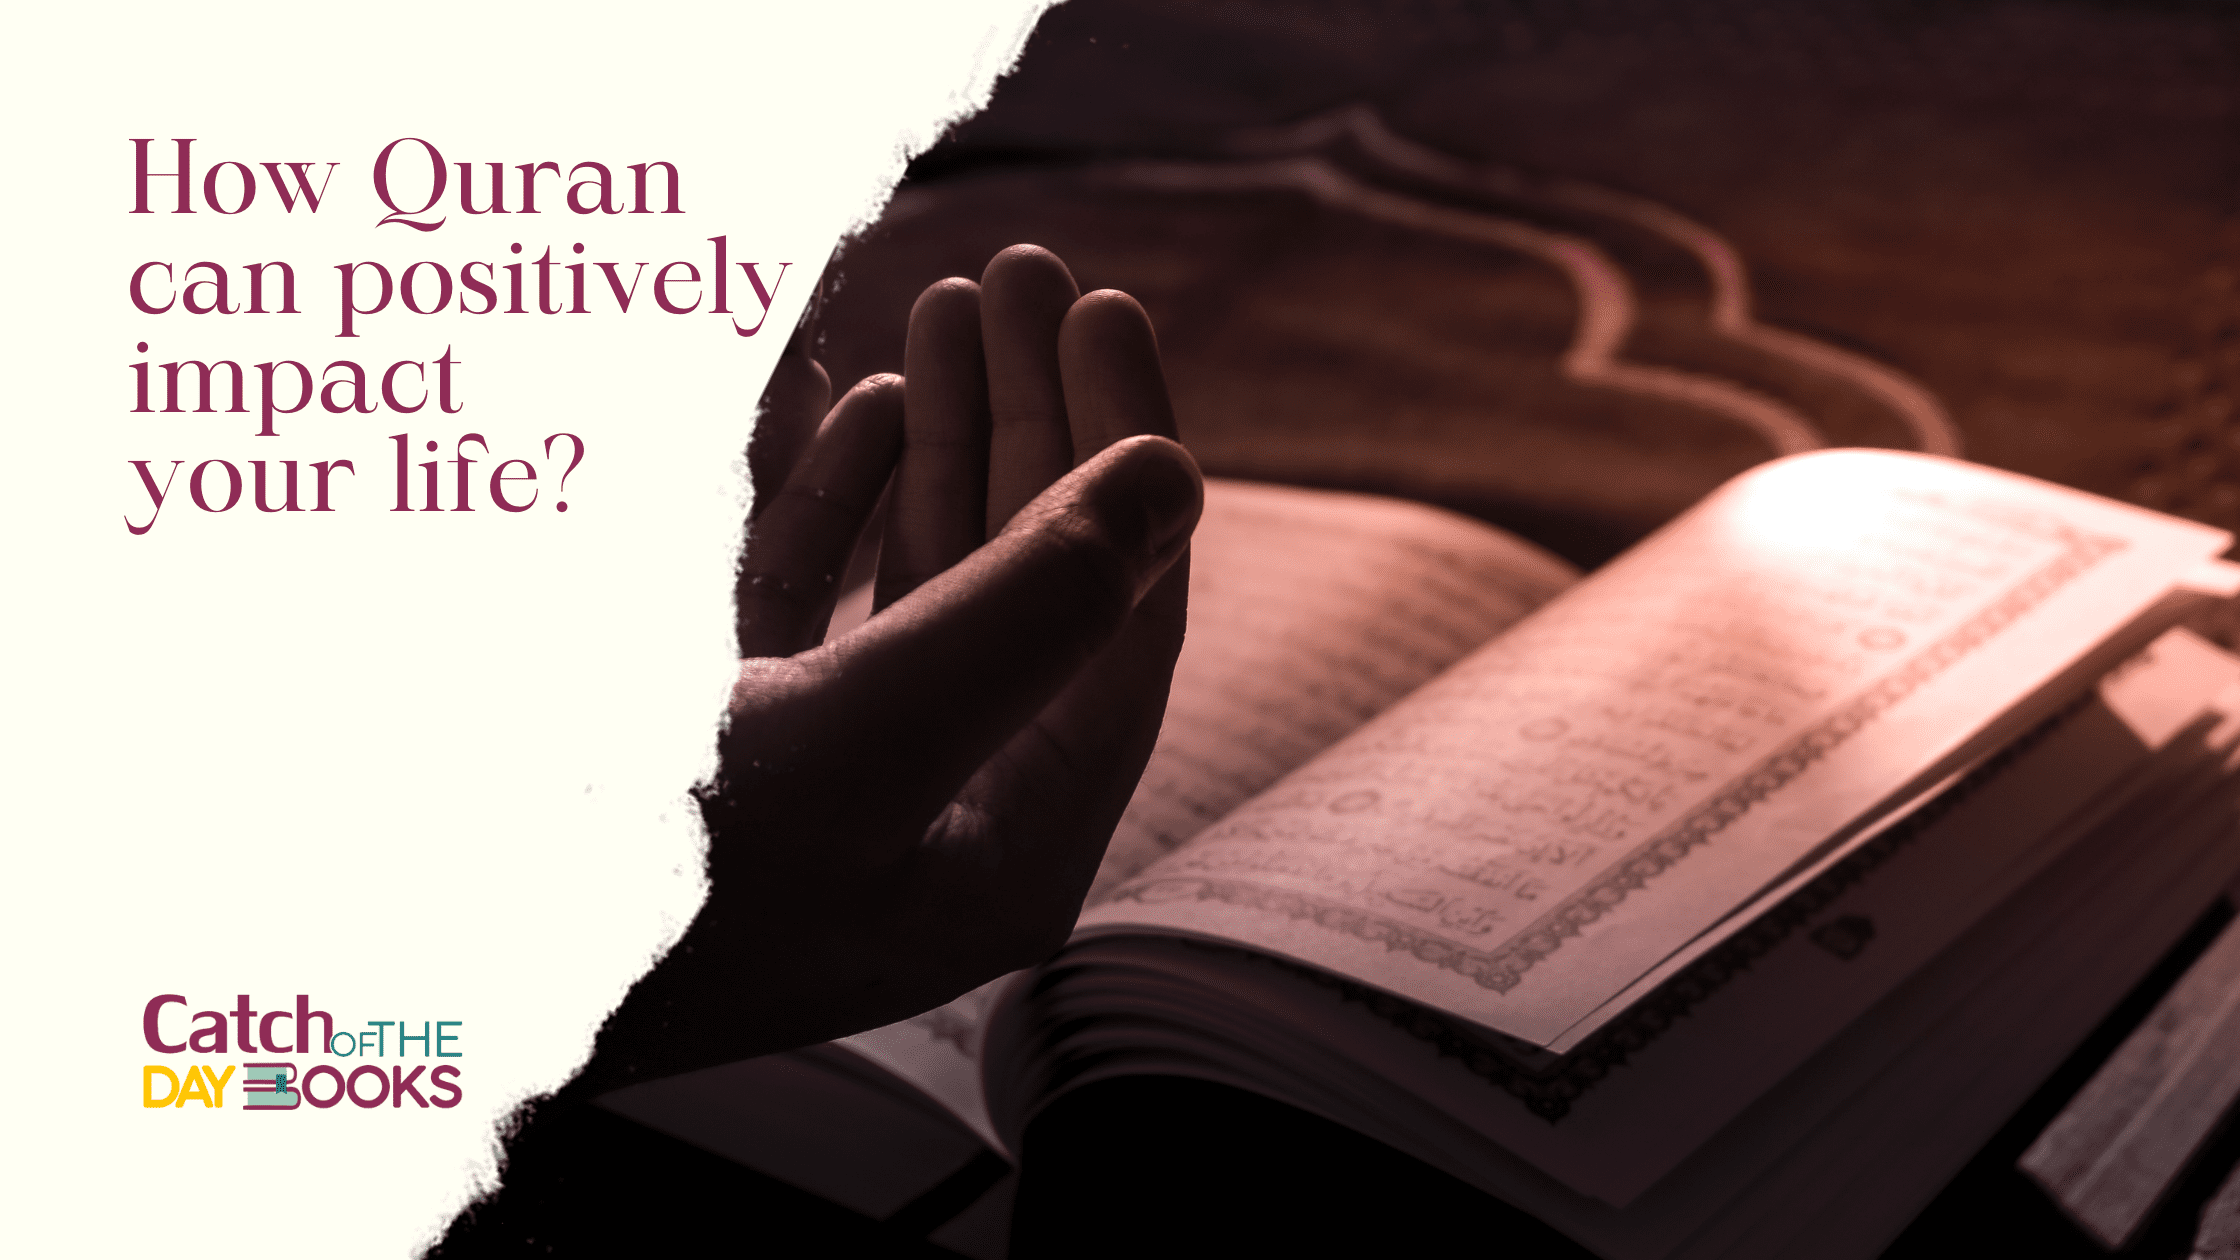 How Can the Quran Positively Impact Your Life?